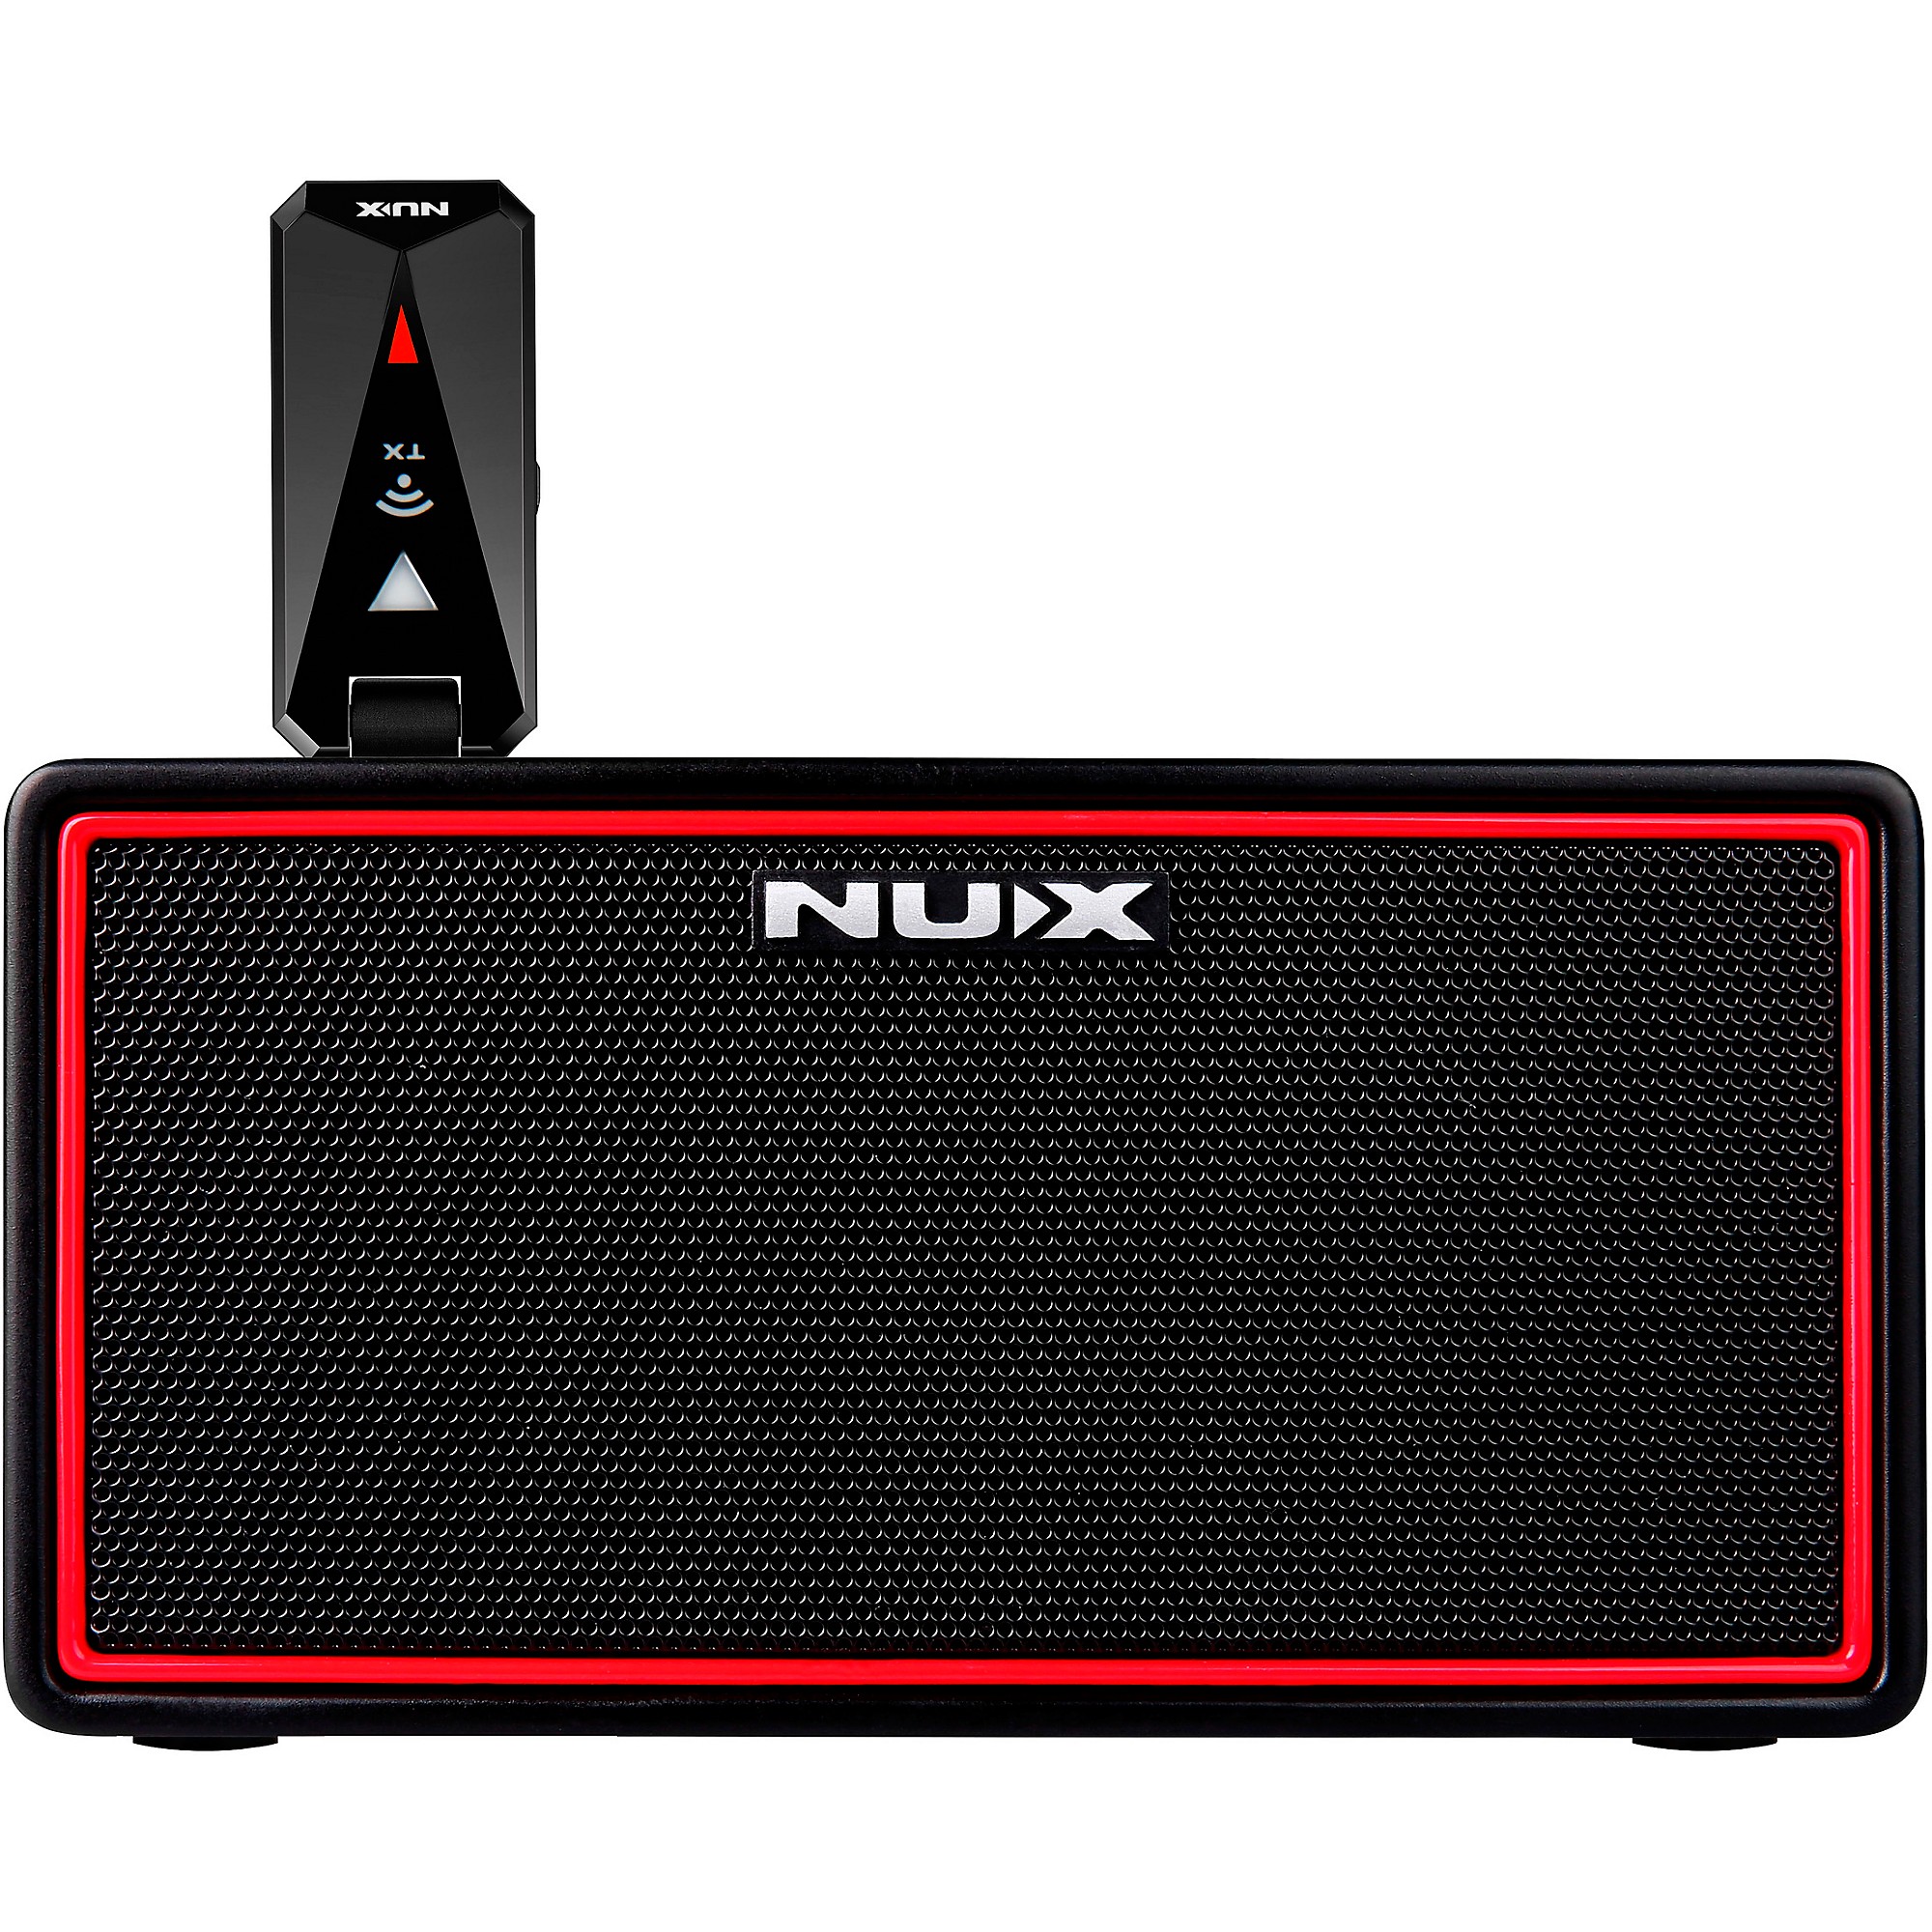 NUX Mighty Air Wireless Stereo Modellin…